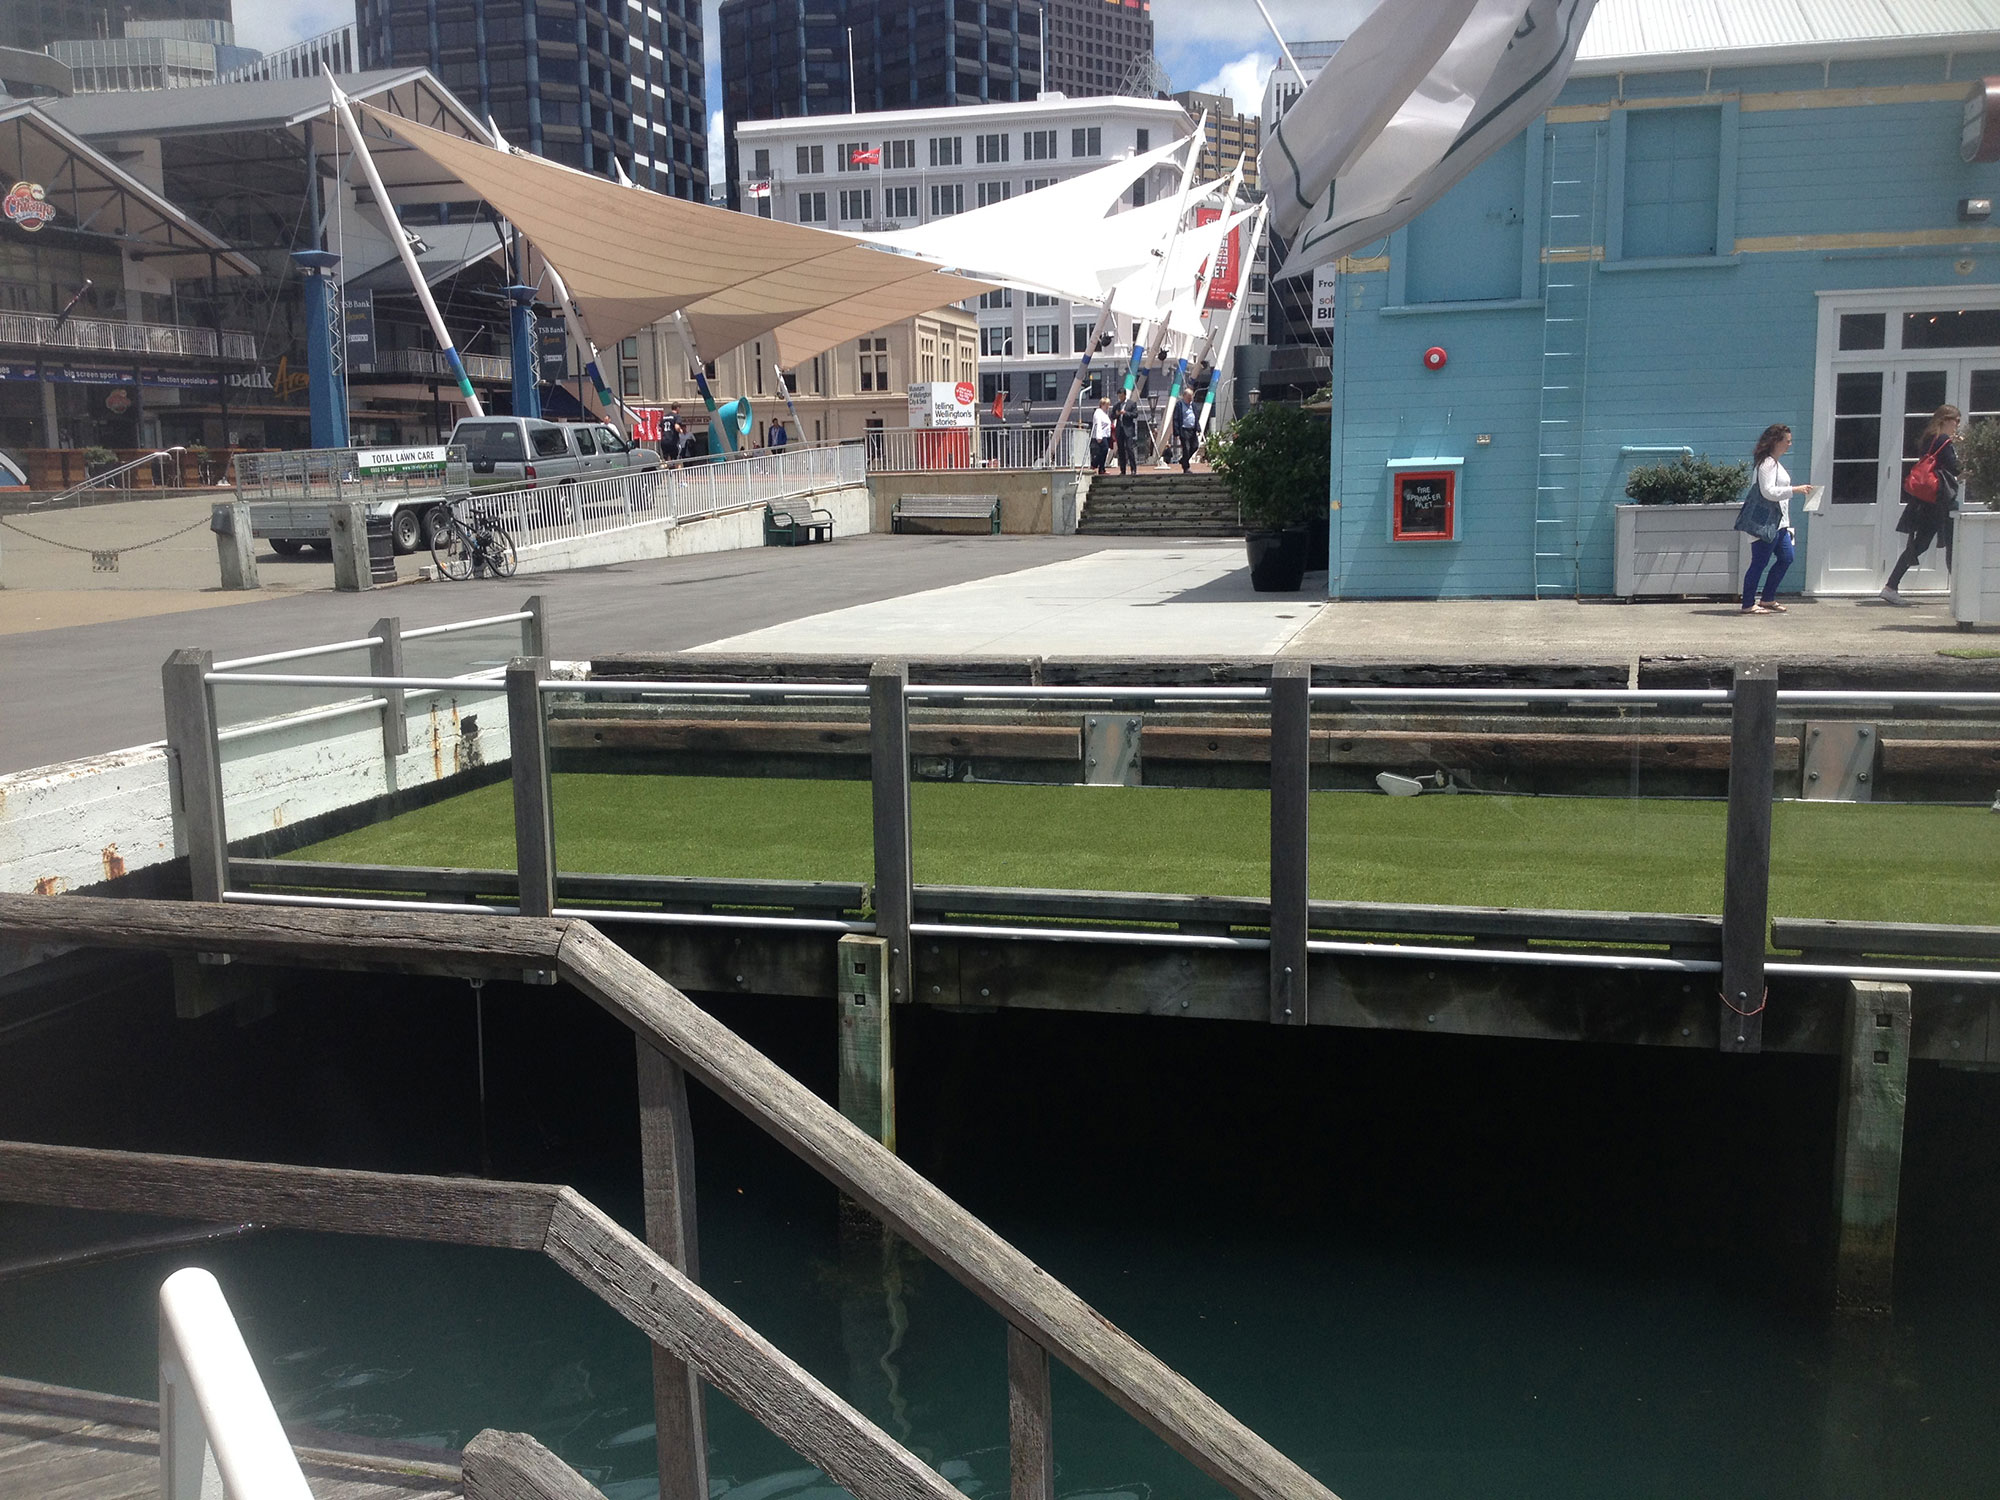 artificial grass at bars, cafes